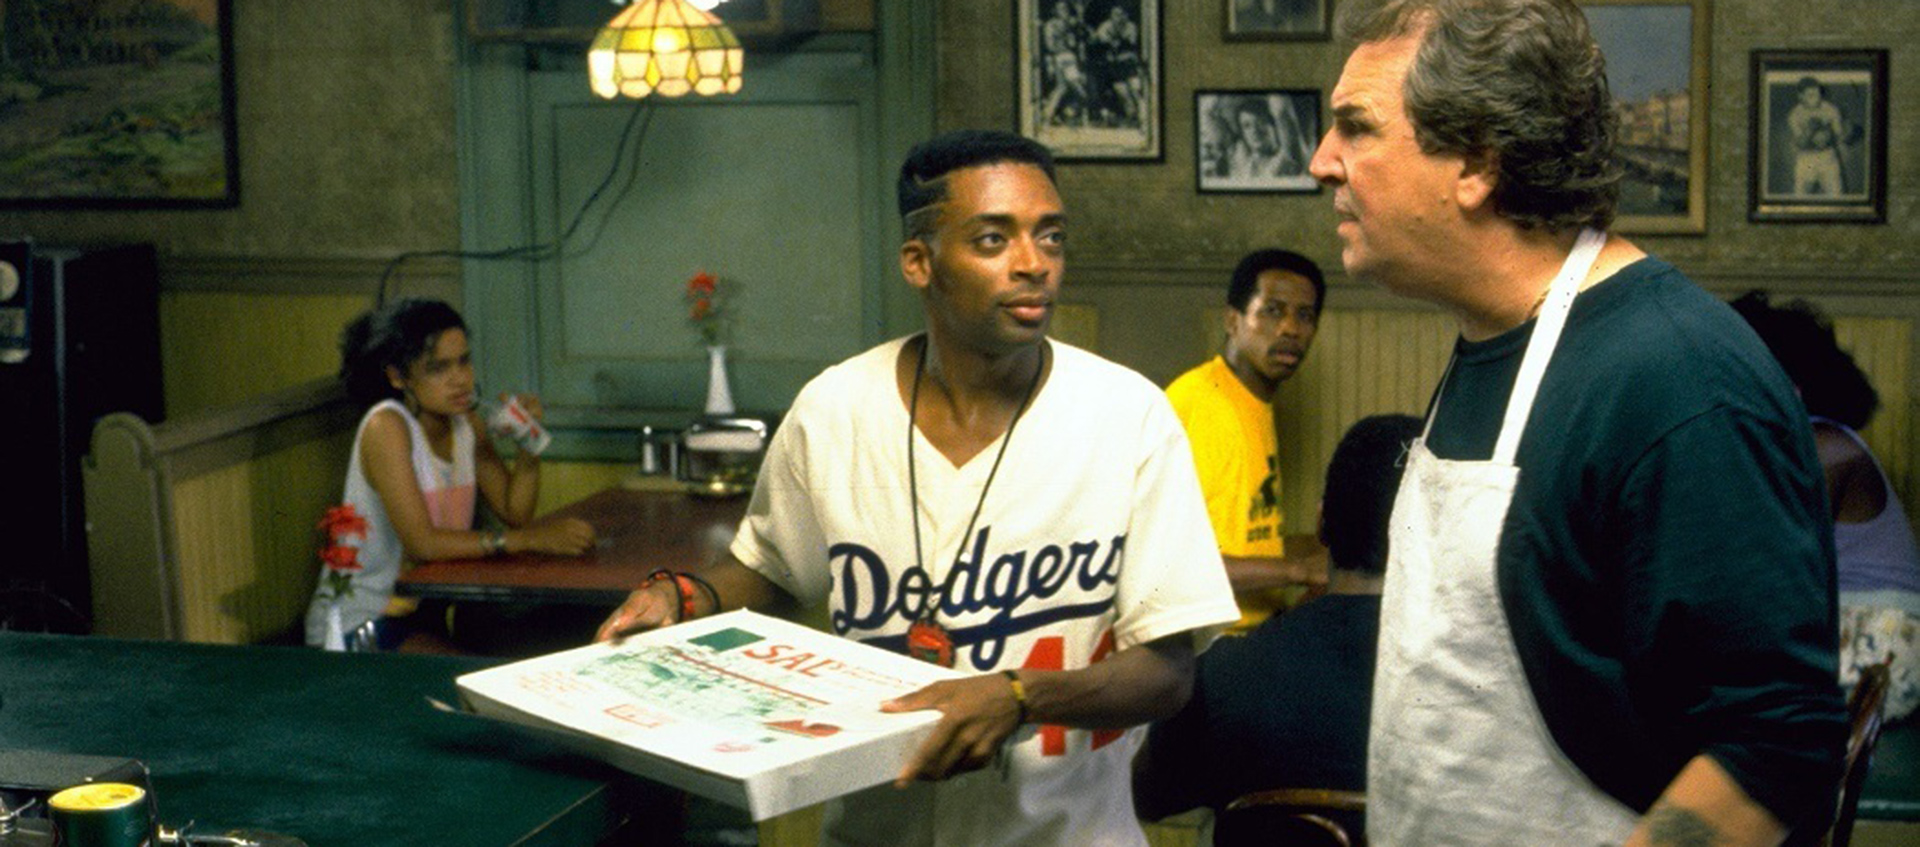 A young man in a Dodgers jersey holding a pizza box looks at an older man wearing a white apron to his right